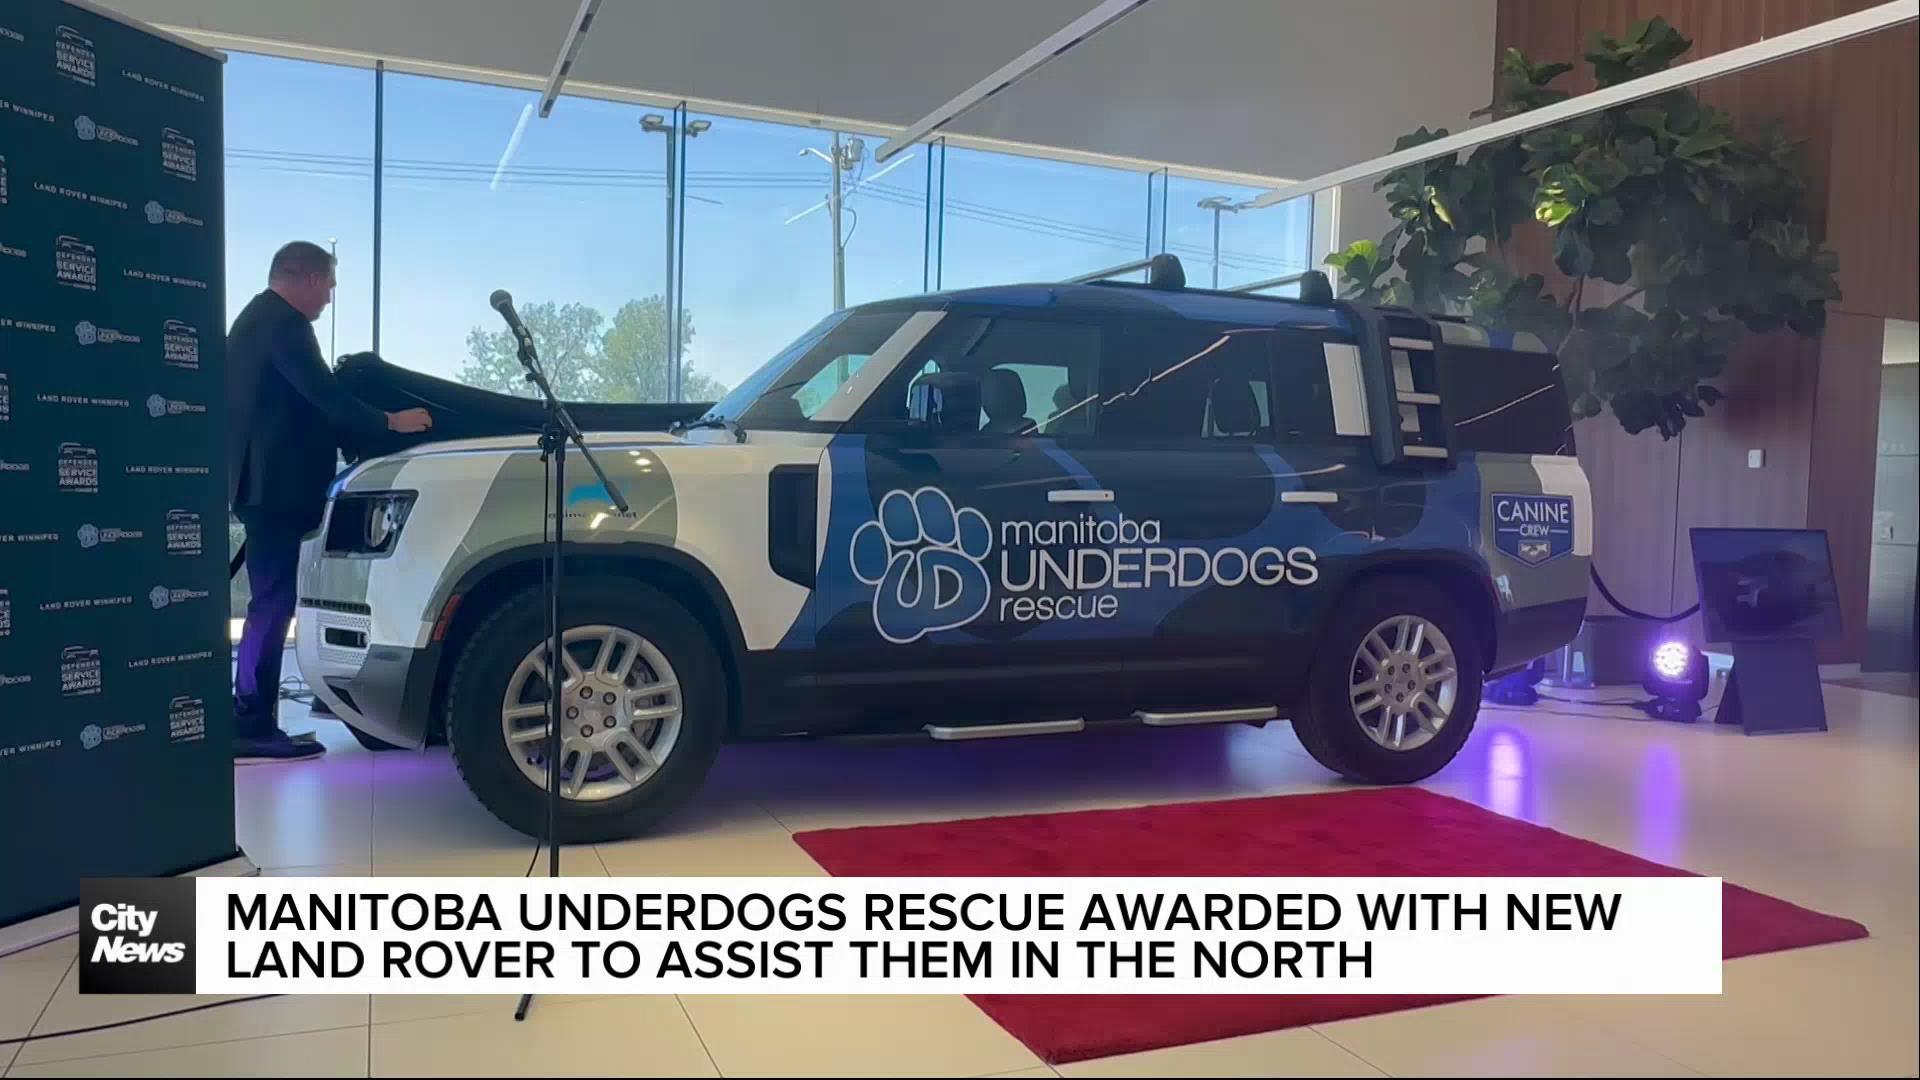 Manitoba Underdogs Rescue receive new Land Rover as part of 'Defender Service Award'